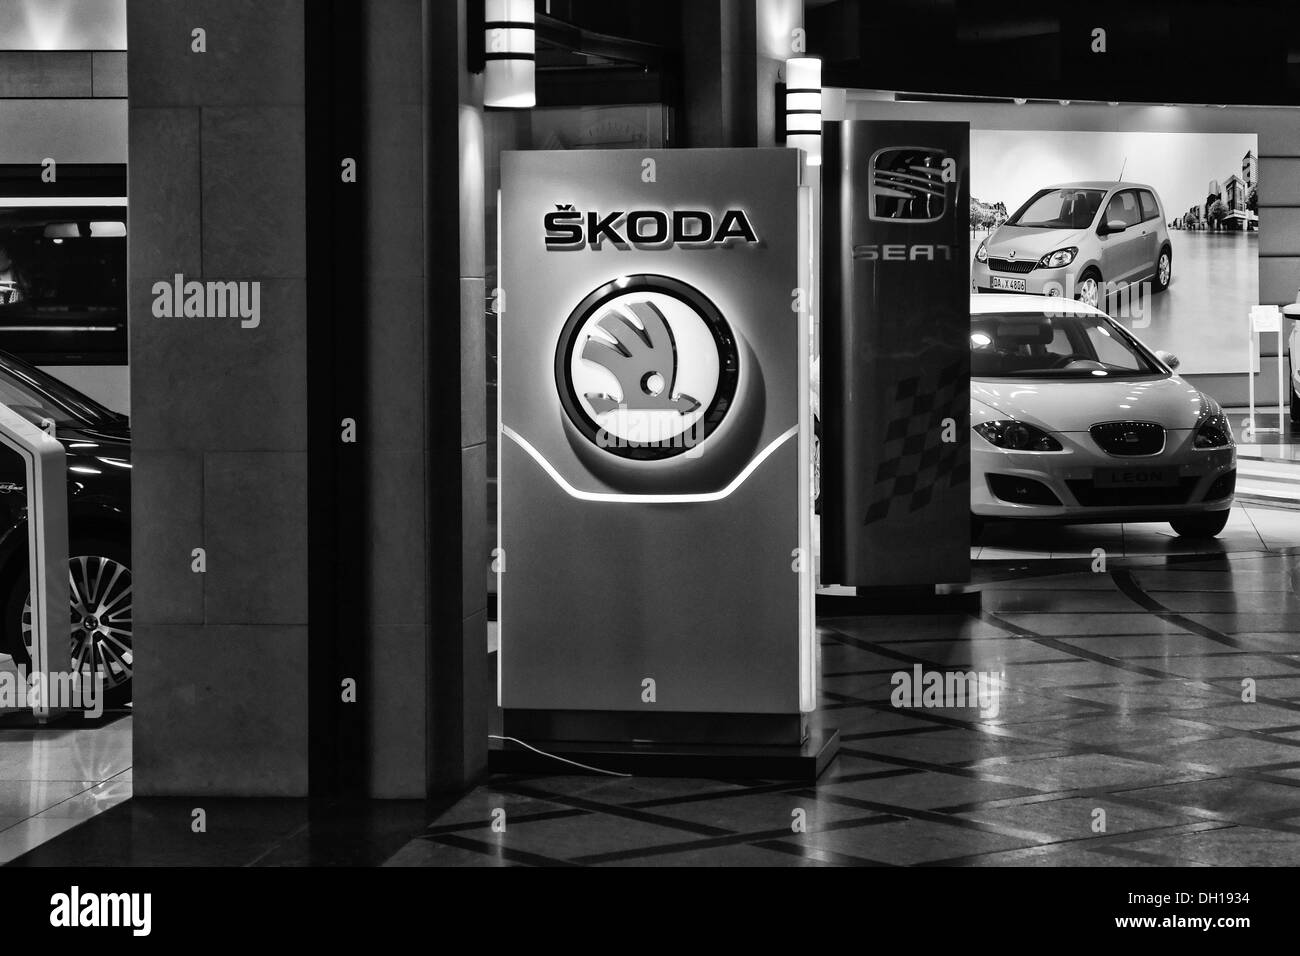 Car dealer selling Skoda and Seat. Black and white. Stock Photo